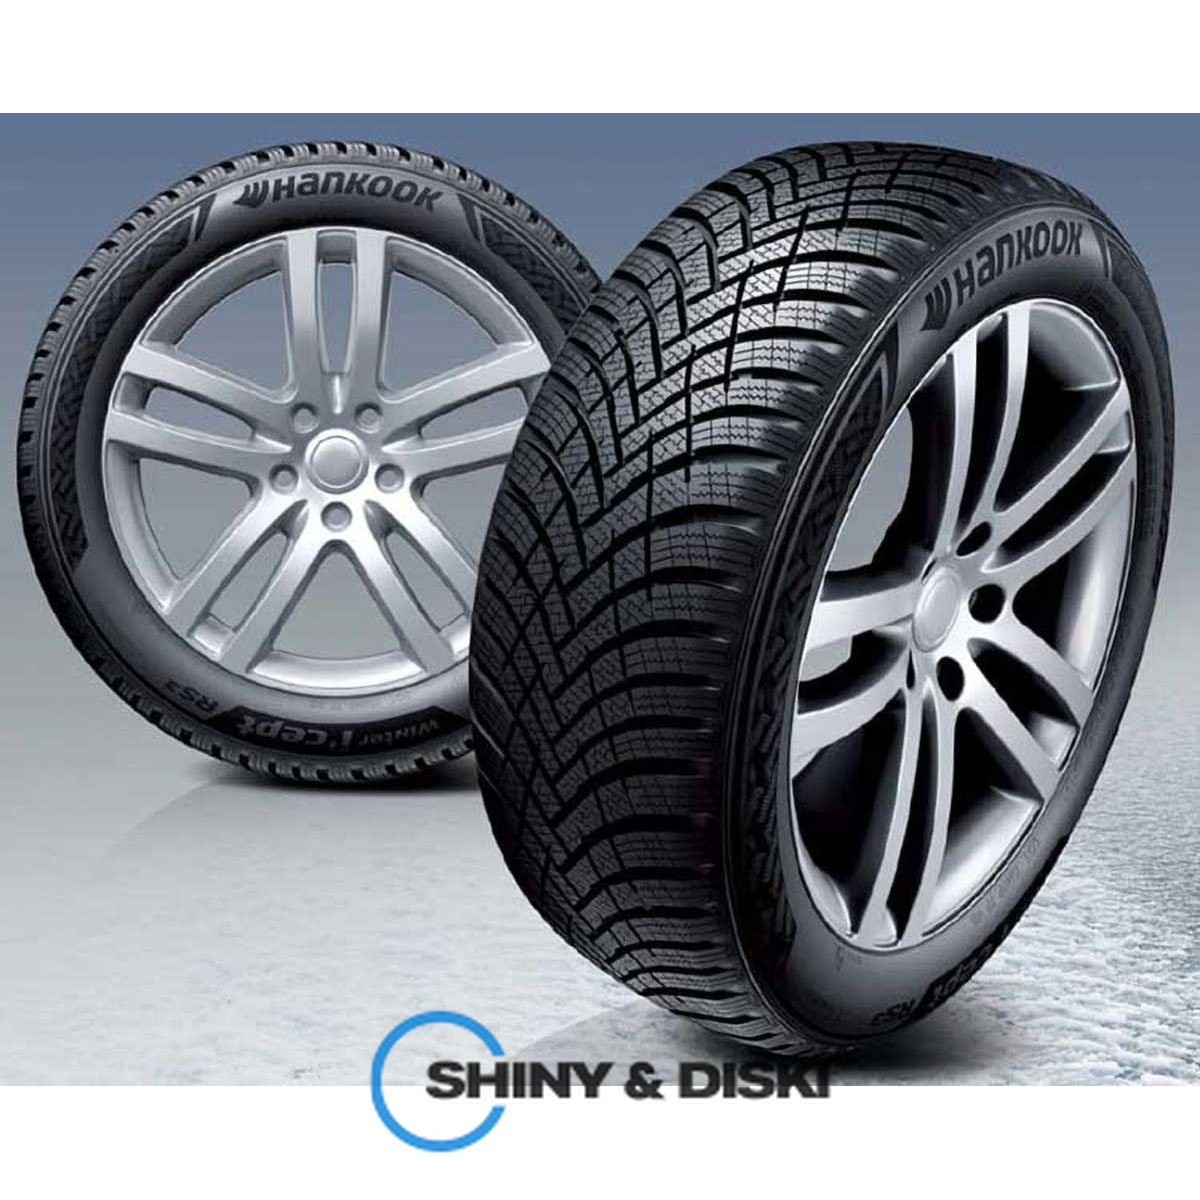 покрышки hankook winter i*cept rs3 w462 175/50 r15 79h